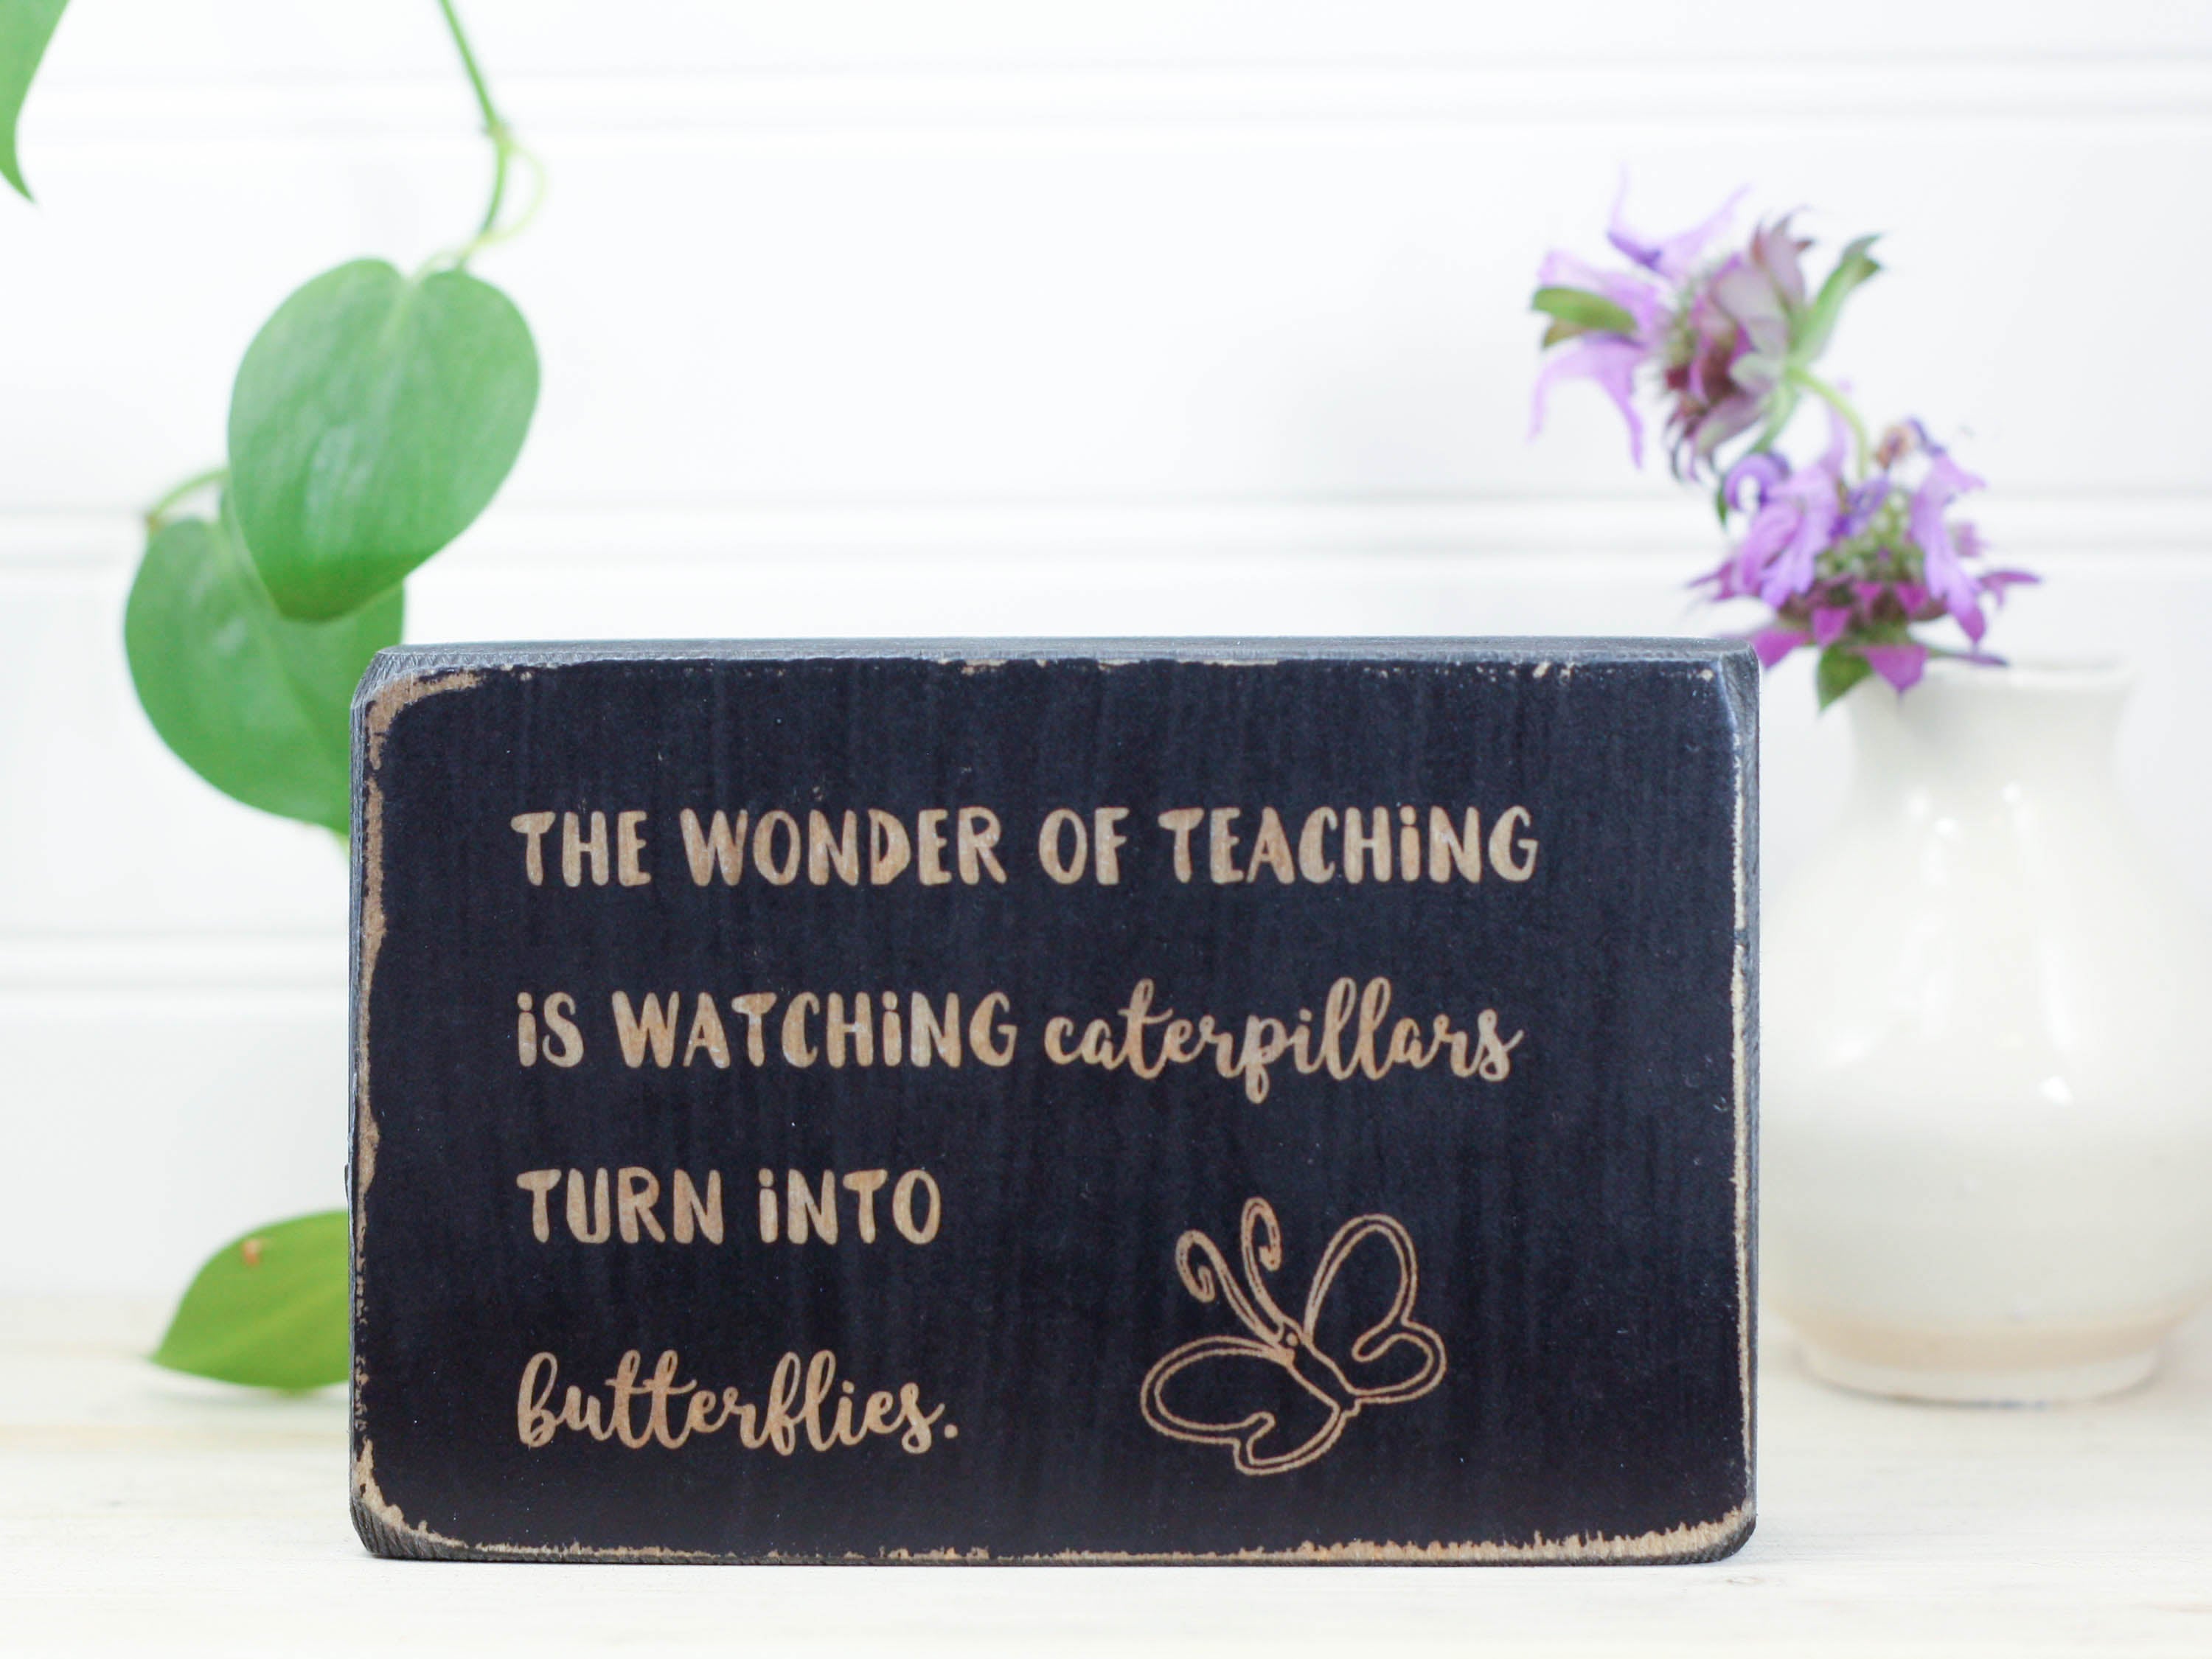 Small wood teacher gift in distressed black with the saying "The wonder of teaching is watching caterpillars turn into butterflies."